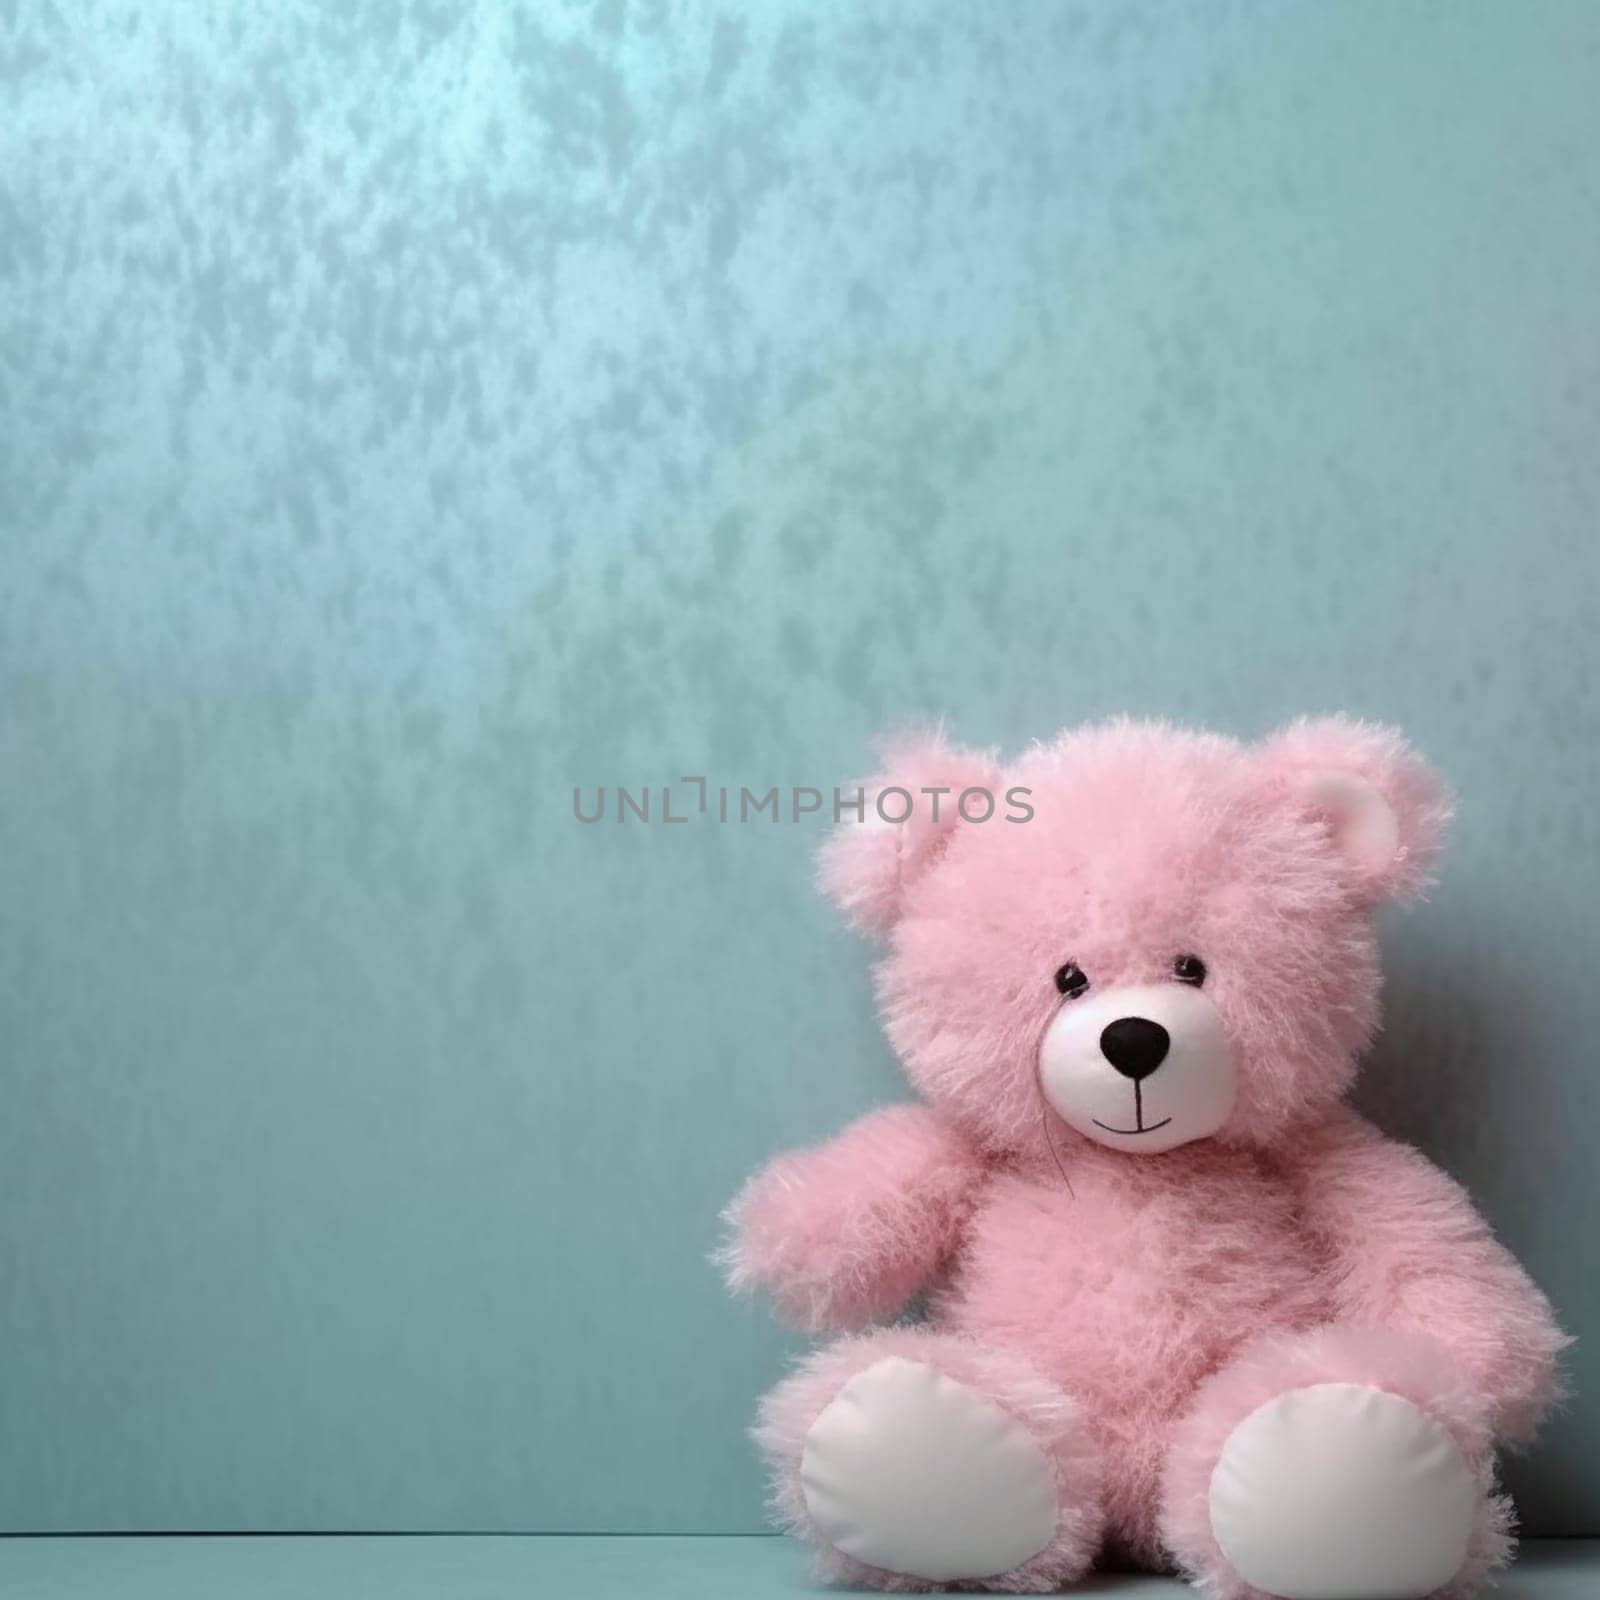 A pink teddy bear sitting against a blue textured background. by Hype2art